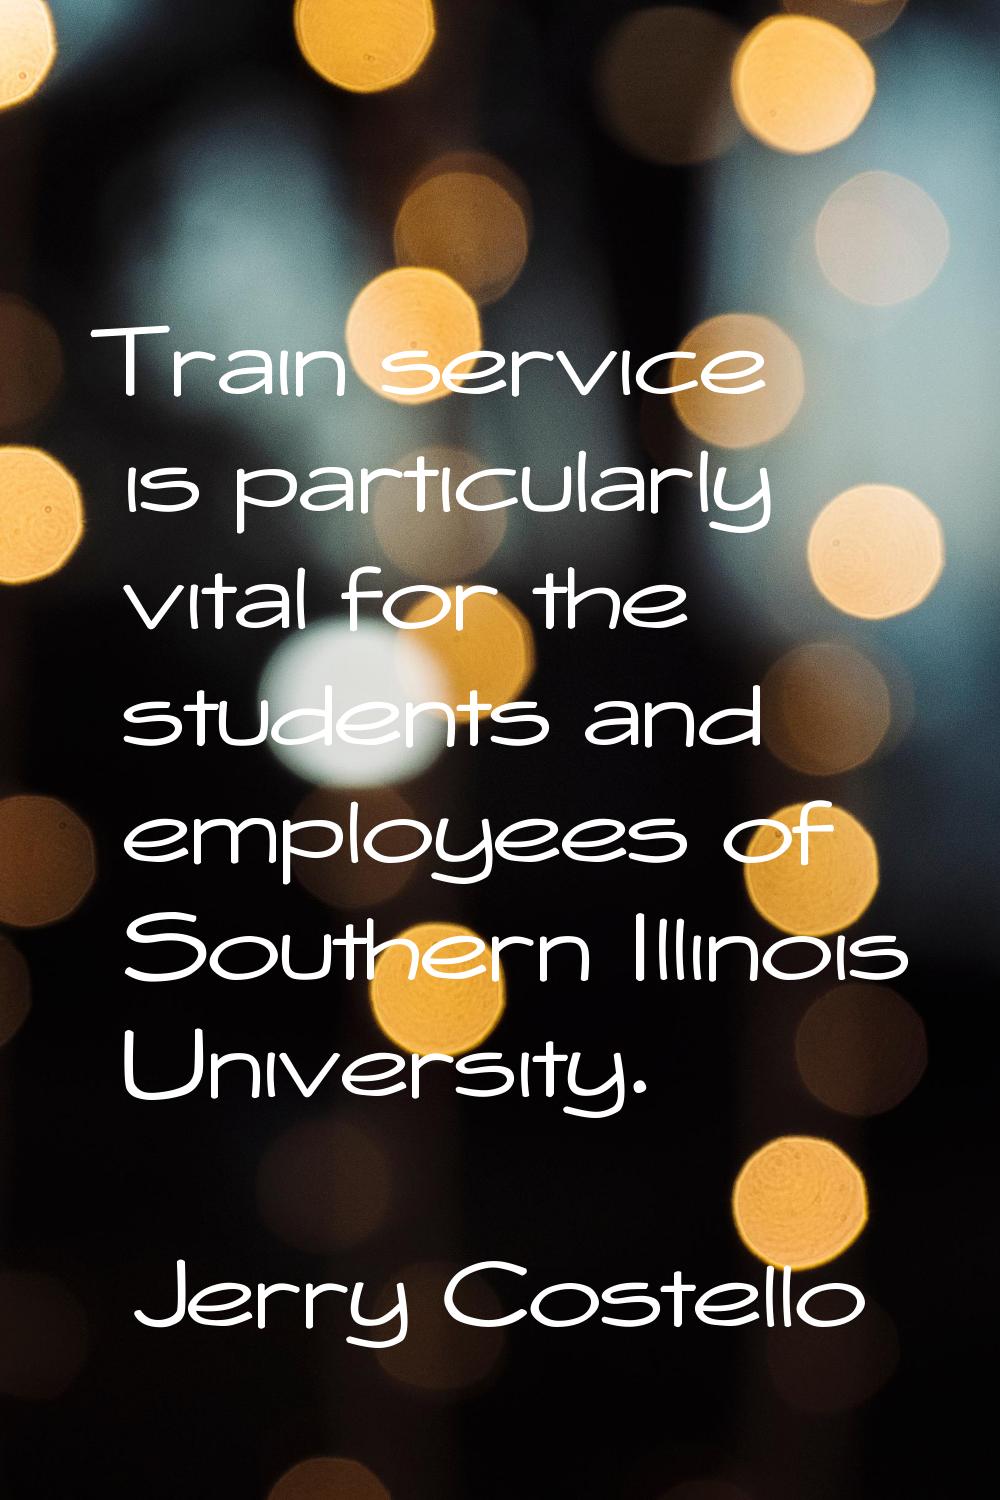 Train service is particularly vital for the students and employees of Southern Illinois University.